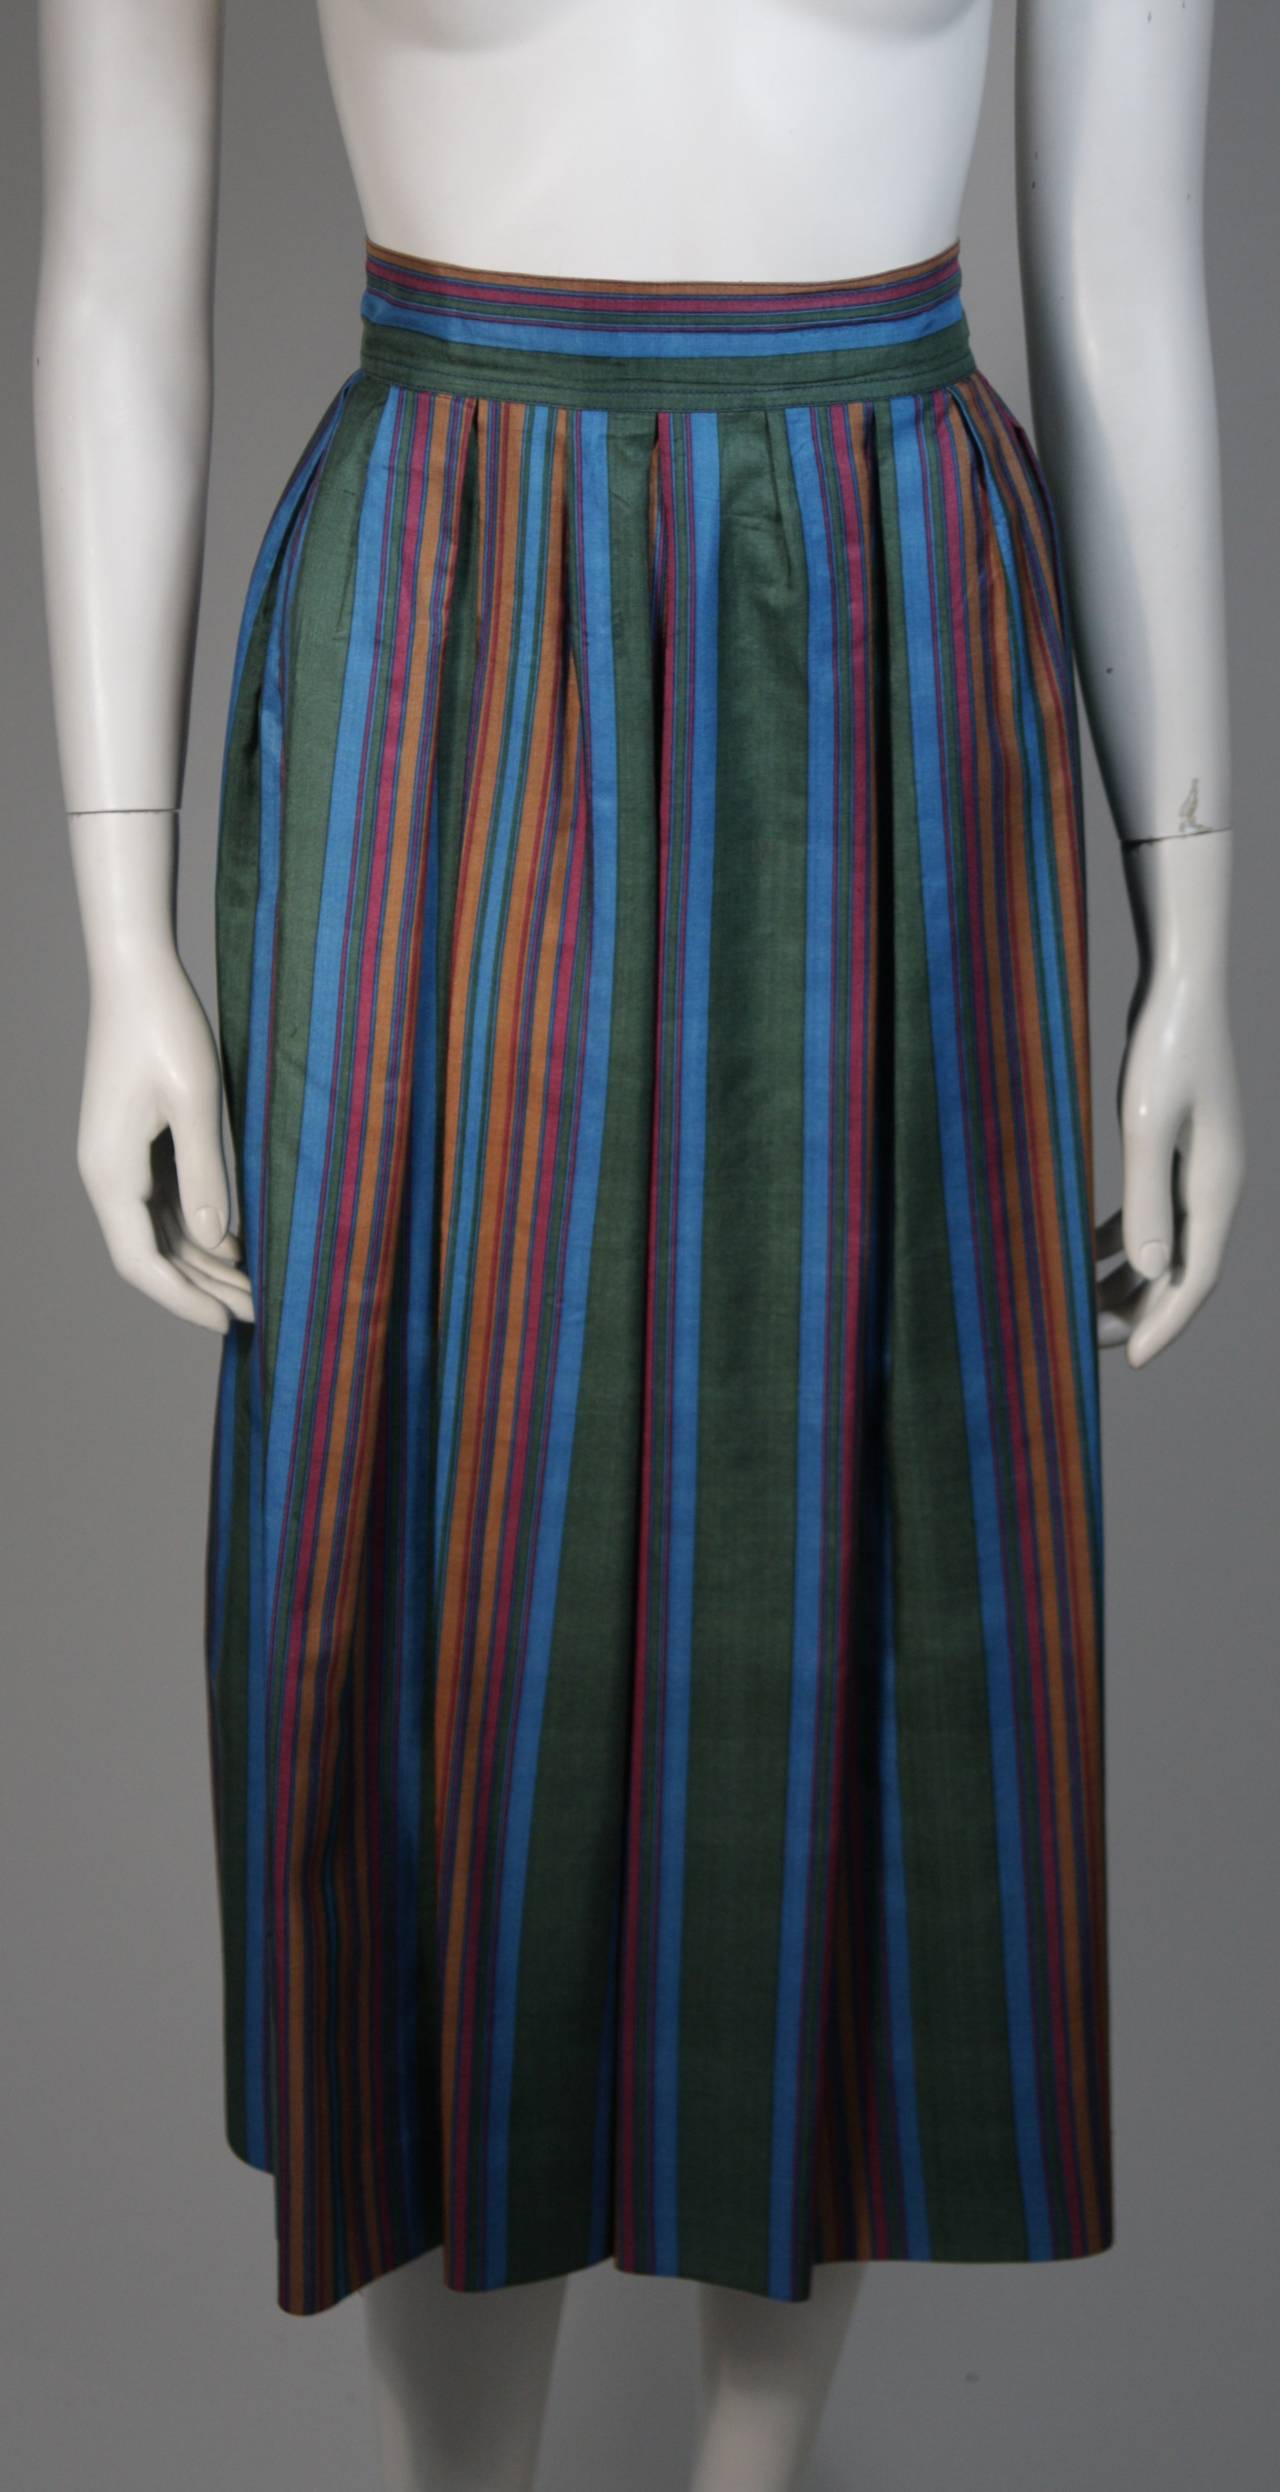 Yves Saint Laurent Silk Skirt and Blouse Ensemble with Vertical Stripes Size 40 4